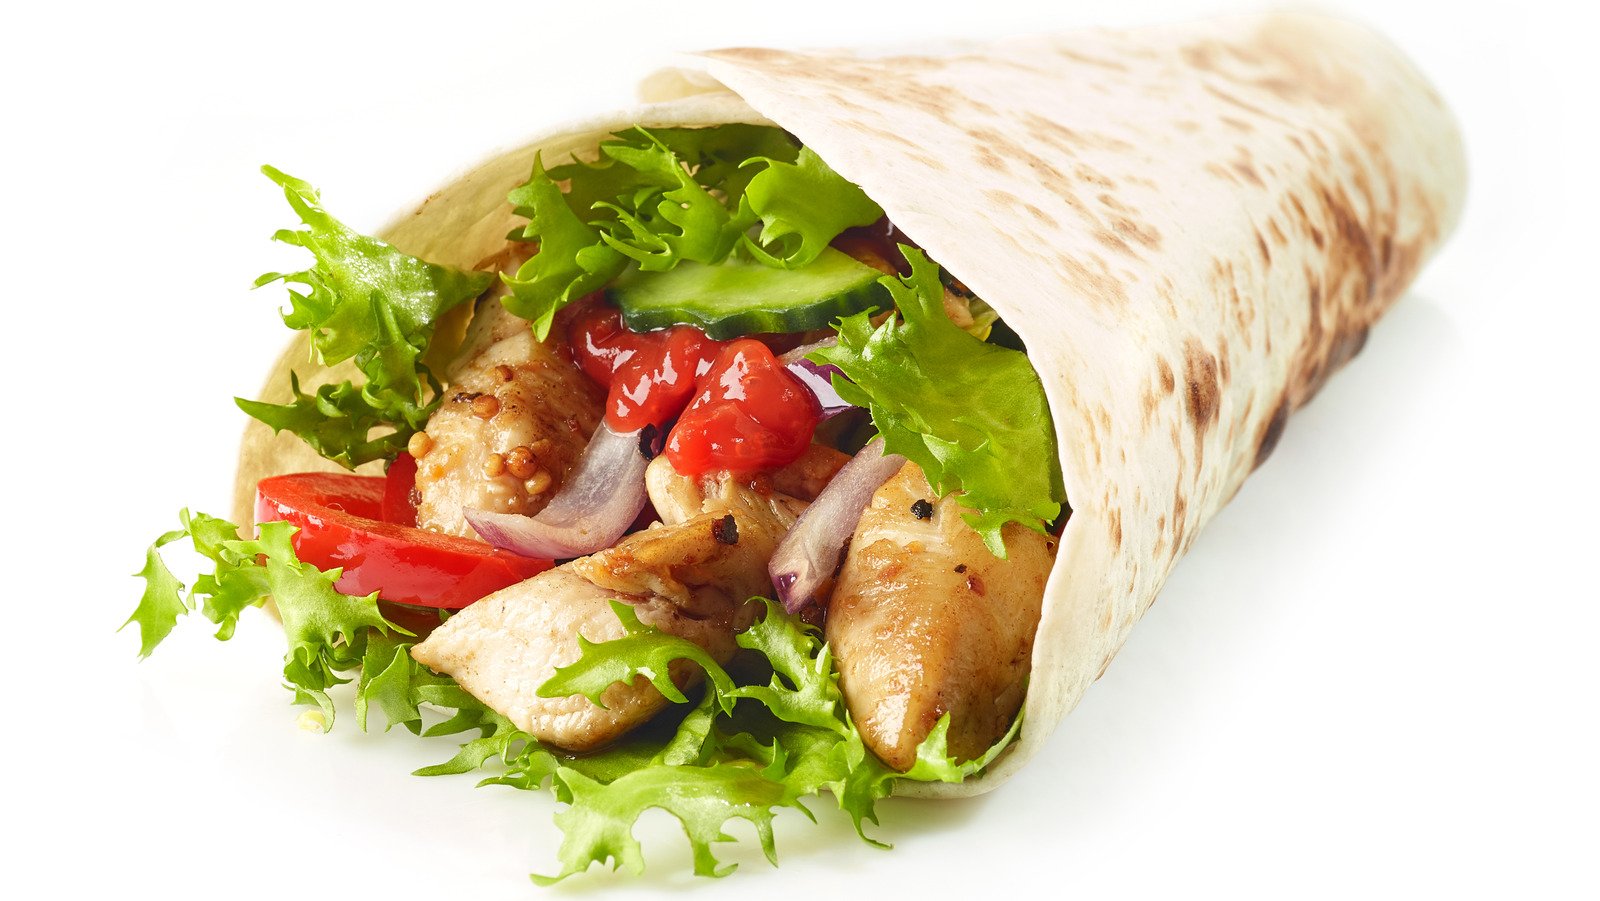 Wraps Vs Sliced Bread: Which One Is Better For You? - Health Digest